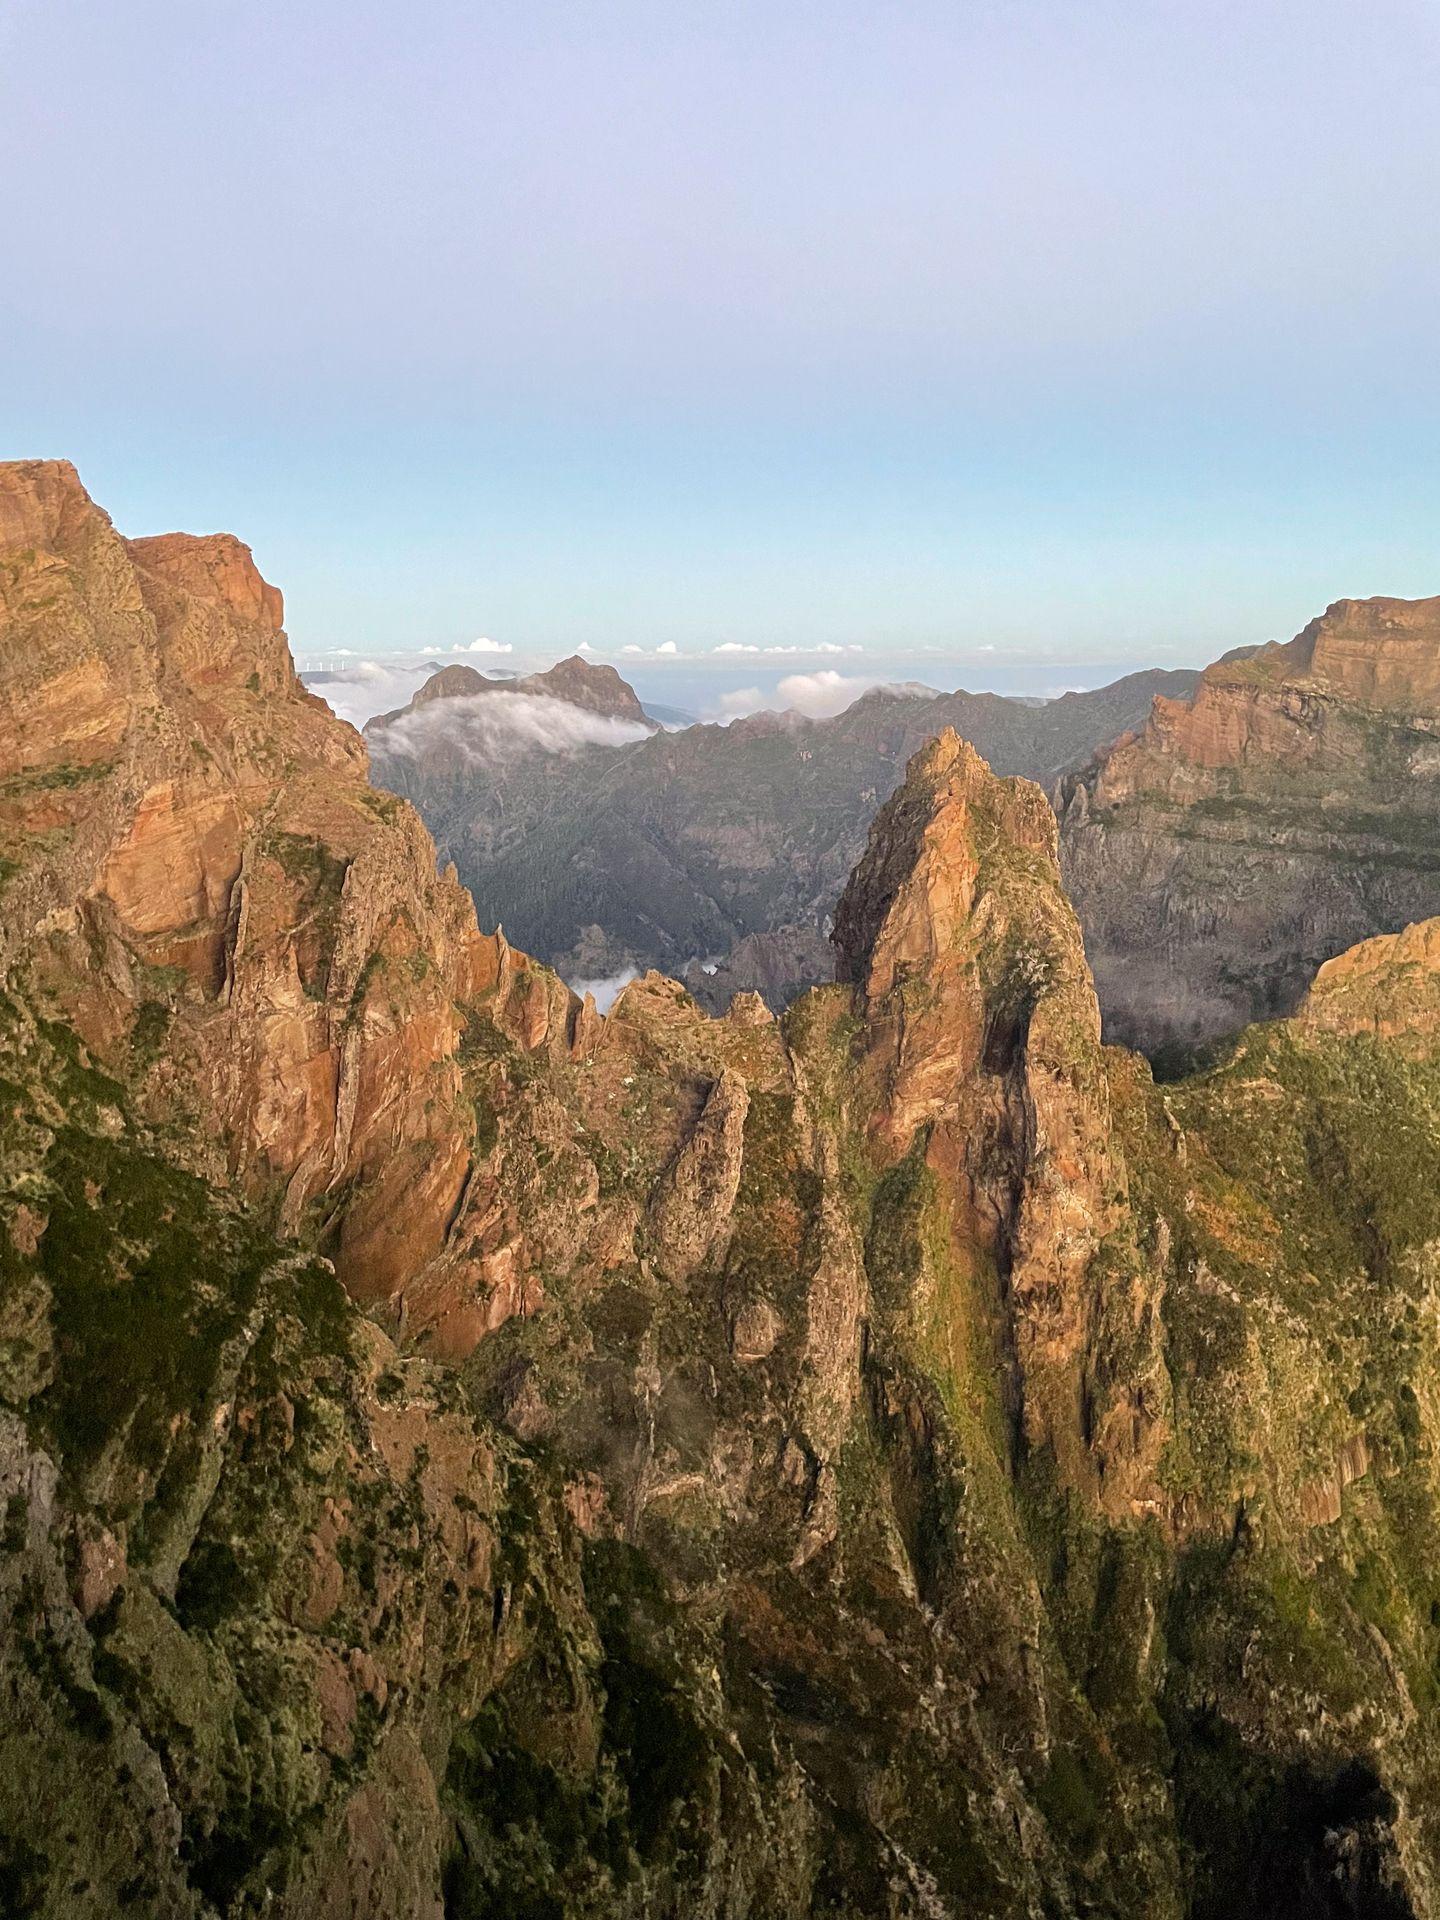 A view of jagged mountain peaks from the PR1 trail in Madeira.